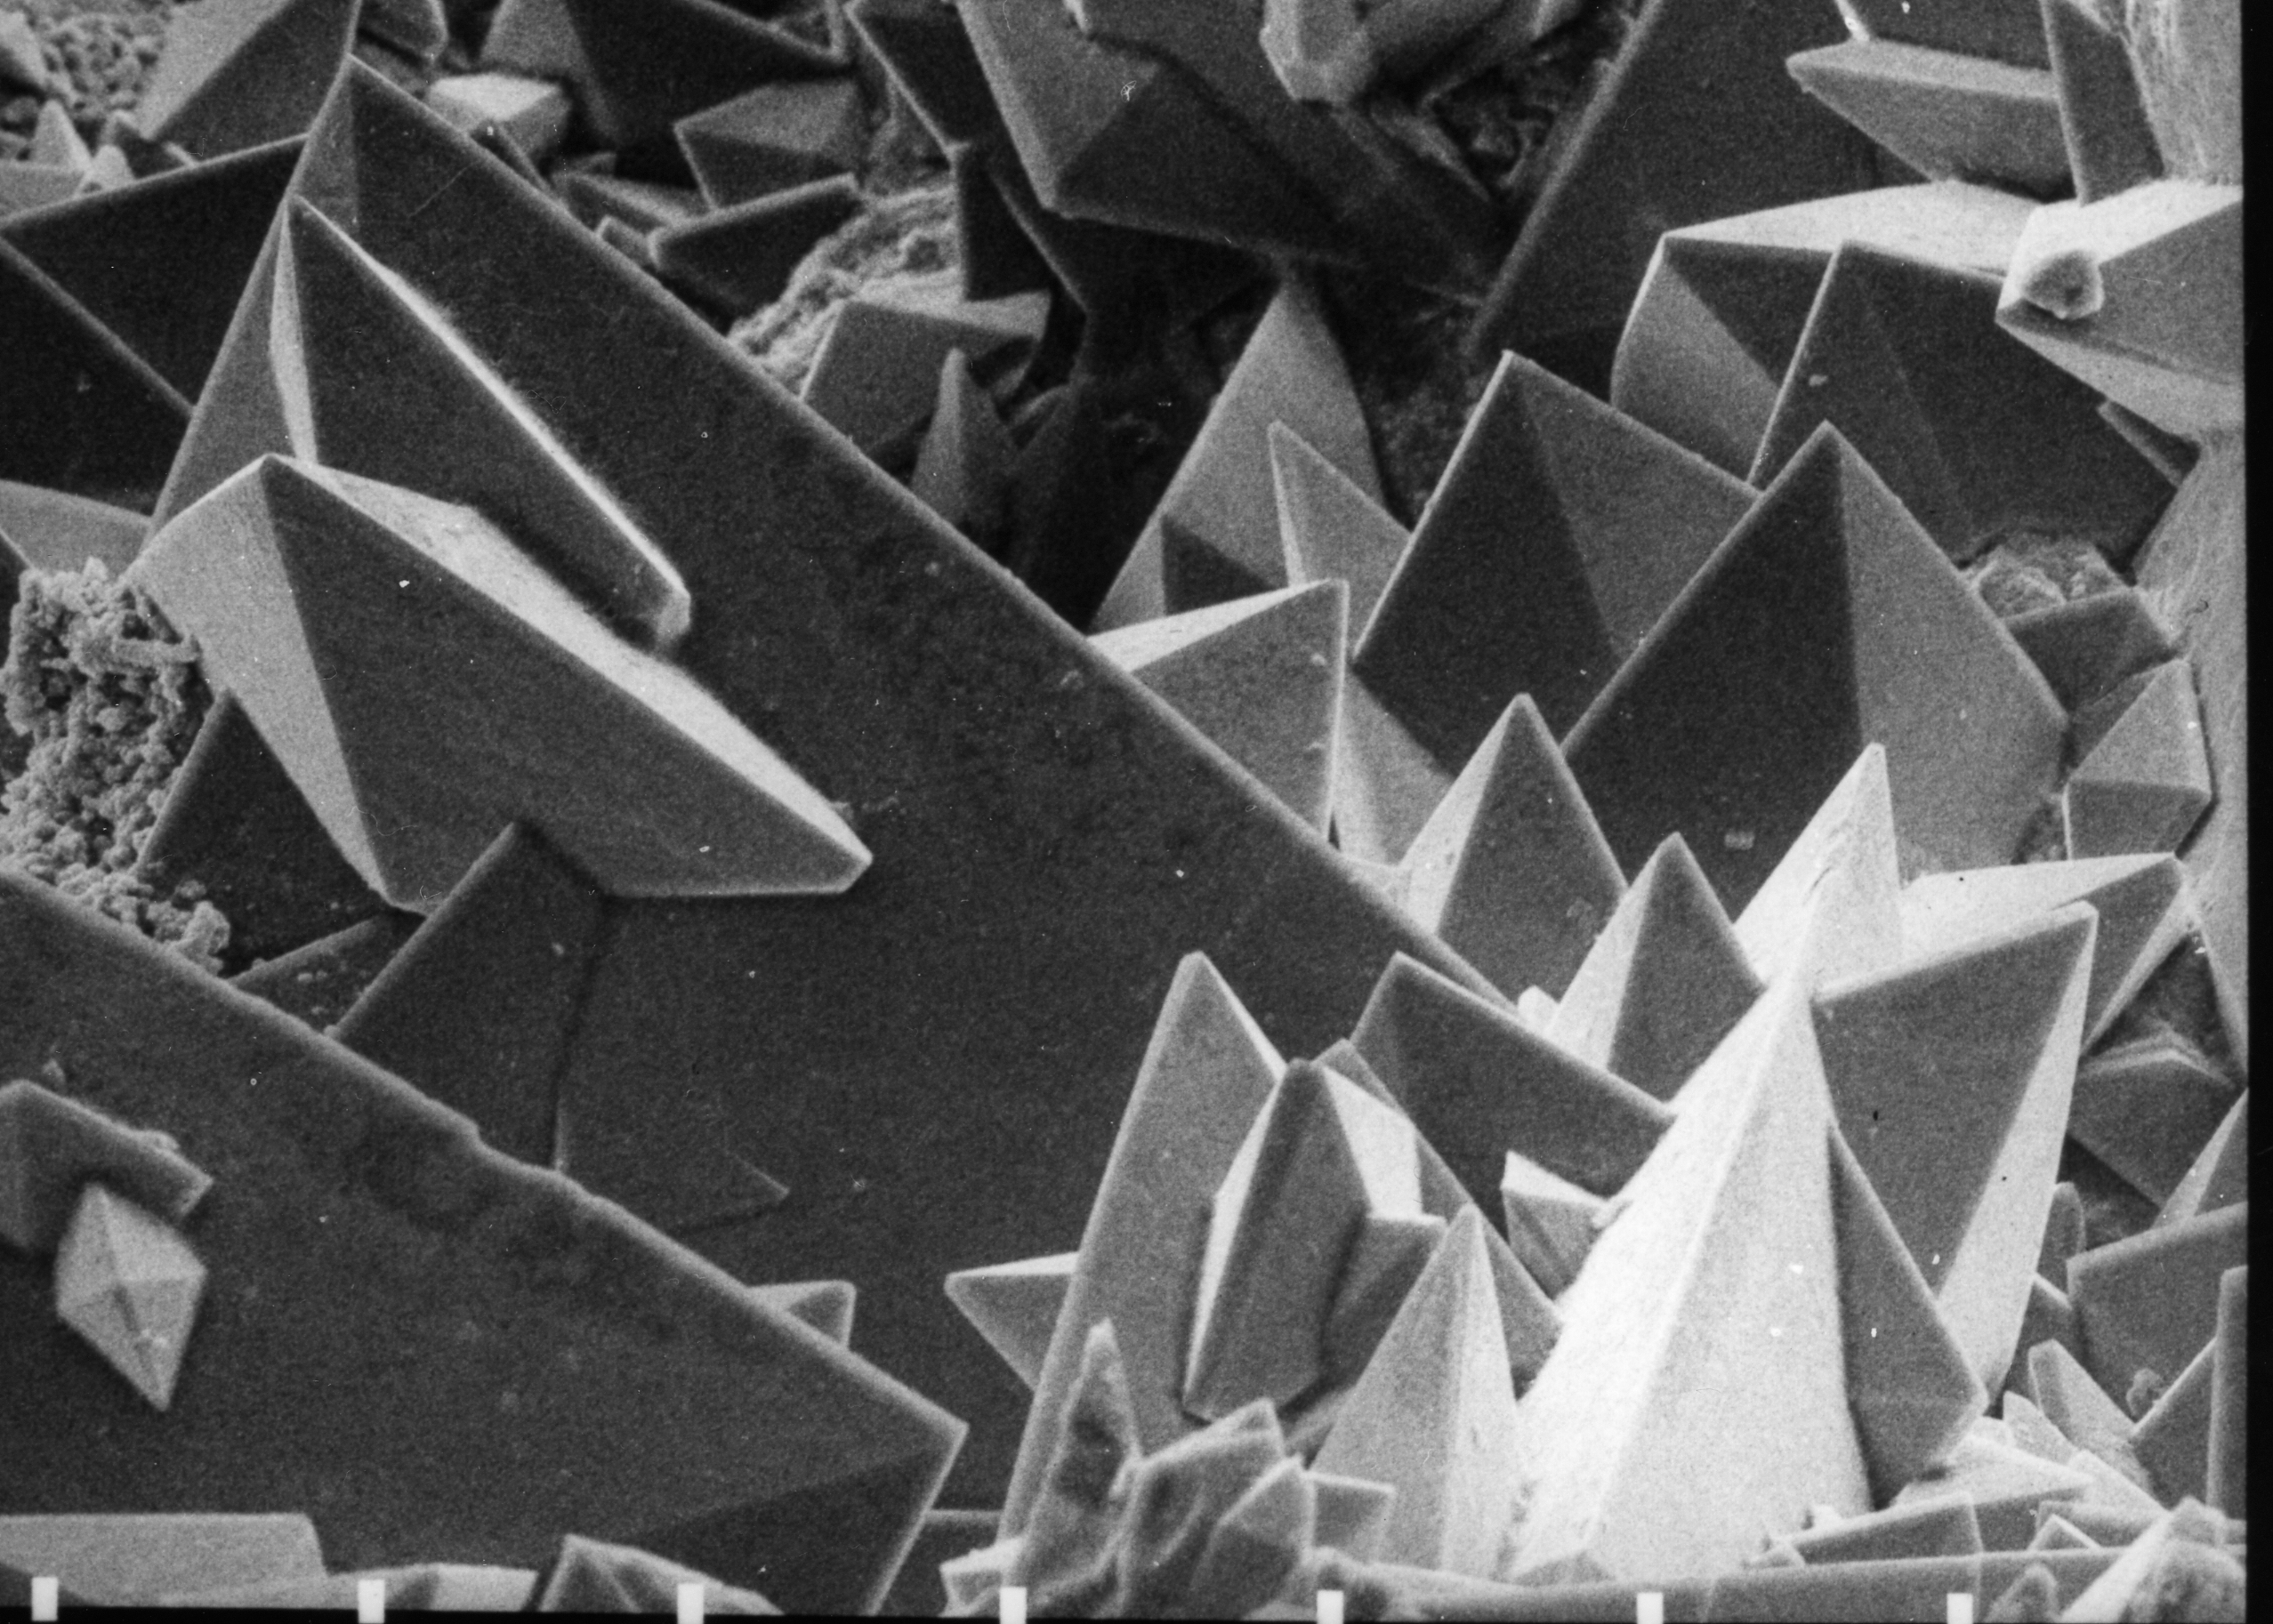 Calcium oxalate dihydrate crystals under Scanning Electron Micrograph (SEM) taken at 30 KV. Source: Wikimedia commons[9]